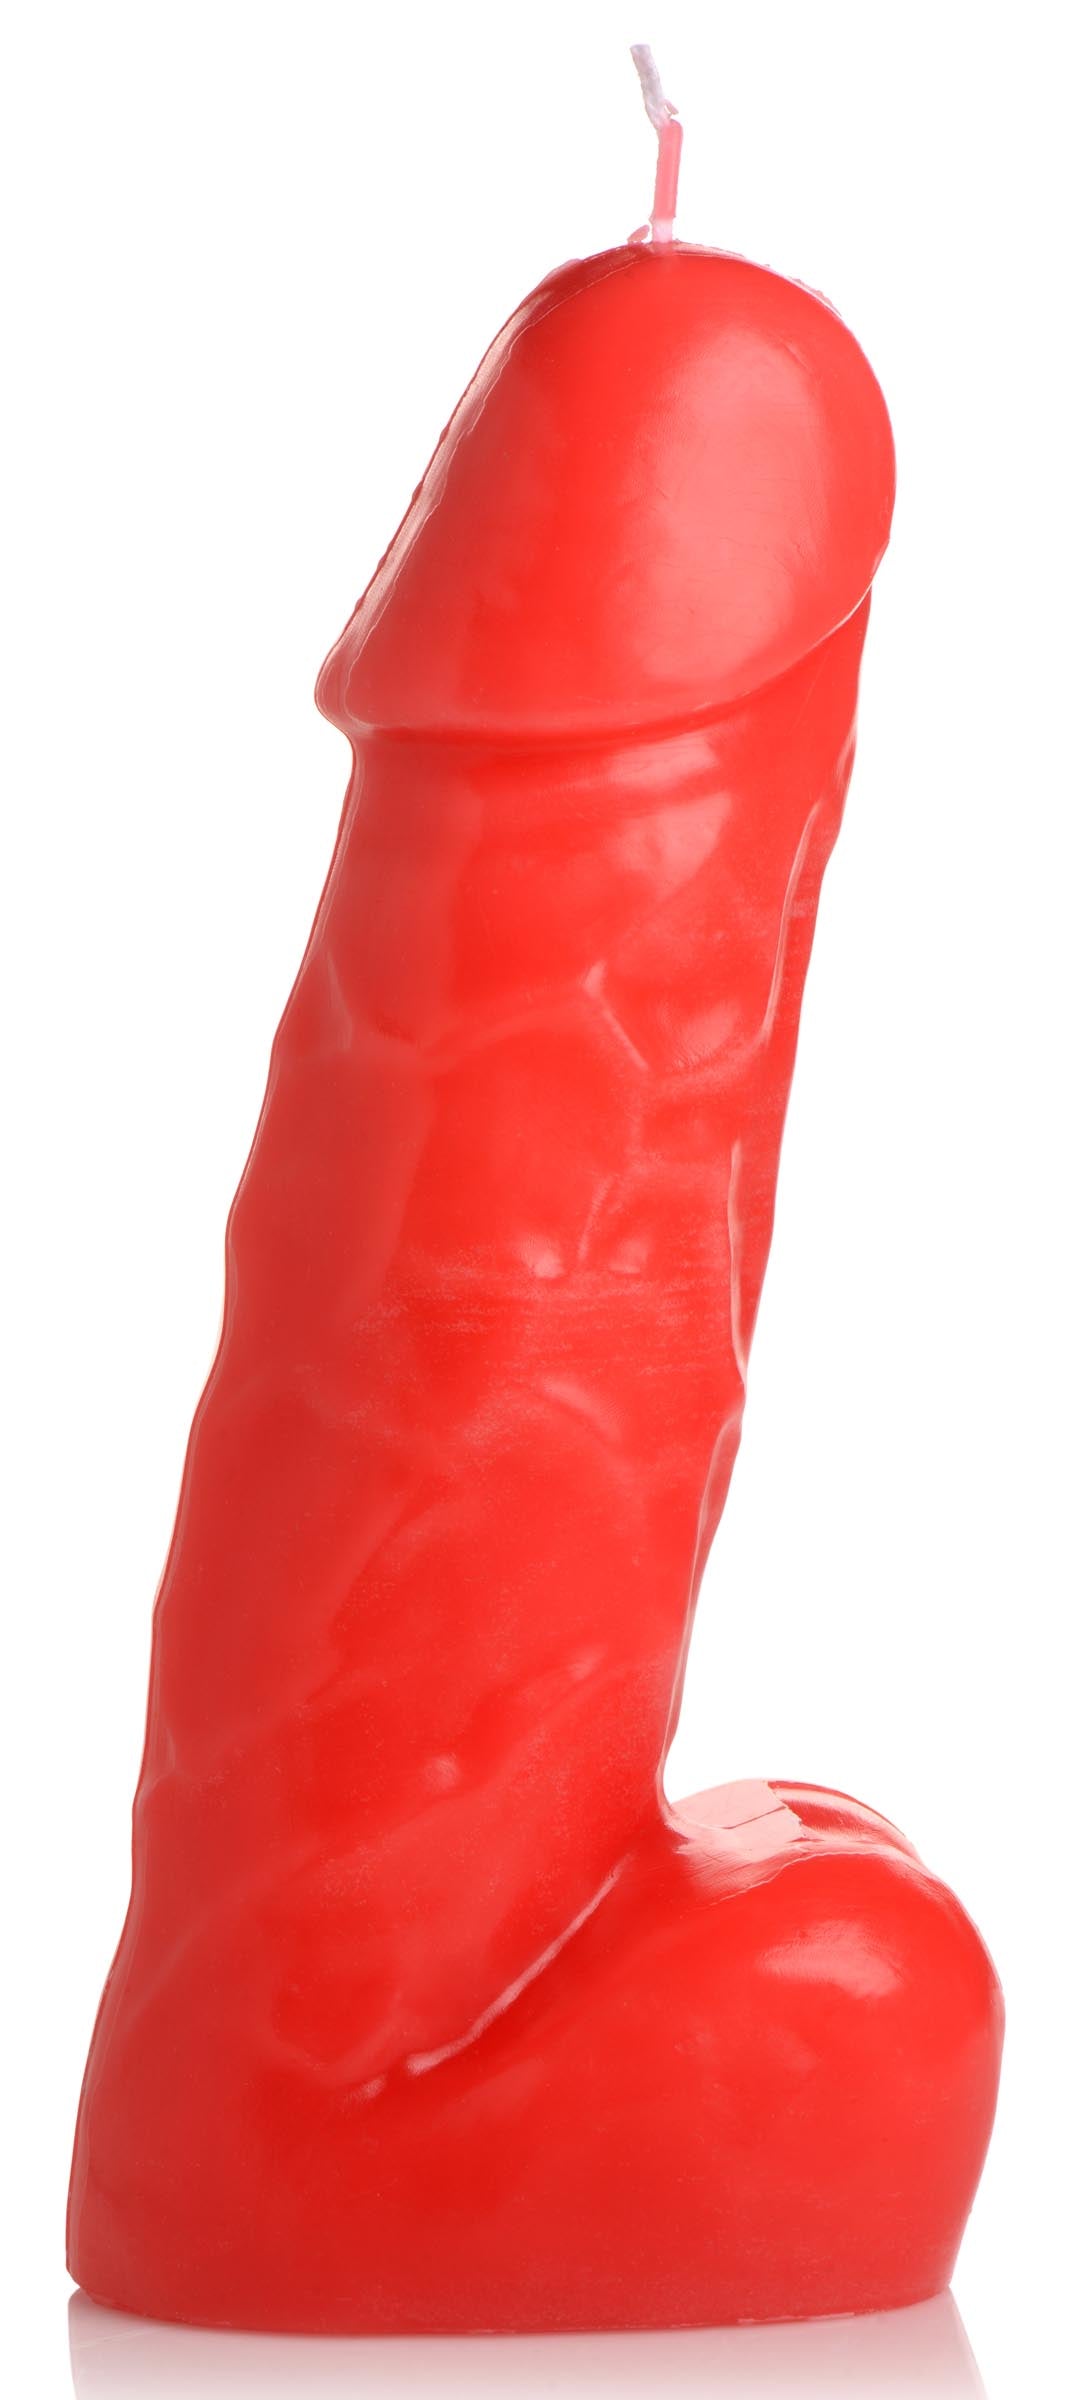 Spicy Pecker Dick Drip Candle - Red - UABDSM